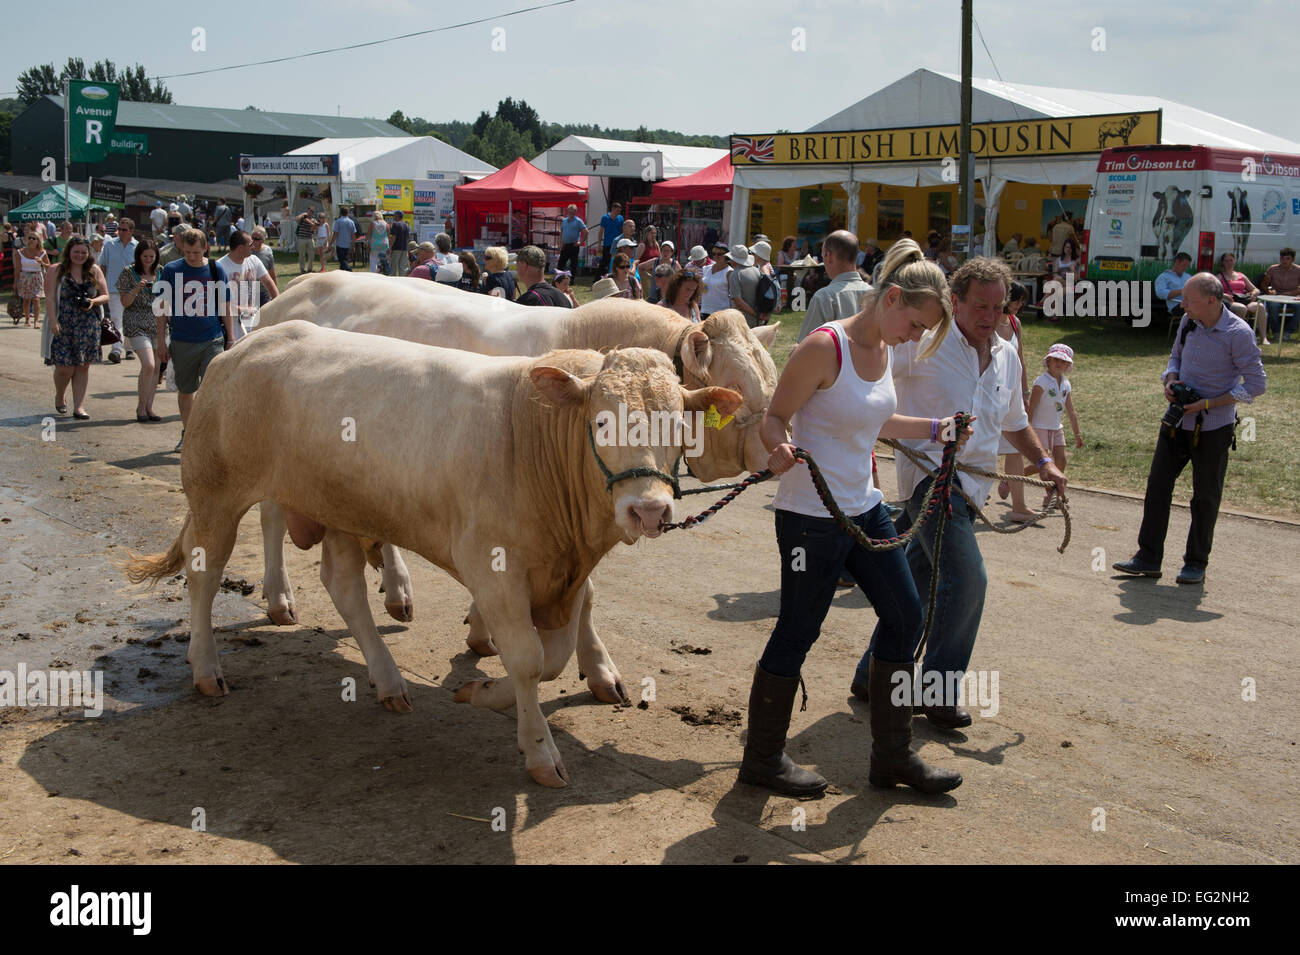 Crowds of people walking along and pair of British Blonde cattle lead by 2 handlers at a sunny Great Yorkshire Show, Harrogate, England, GB, UK. Stock Photo